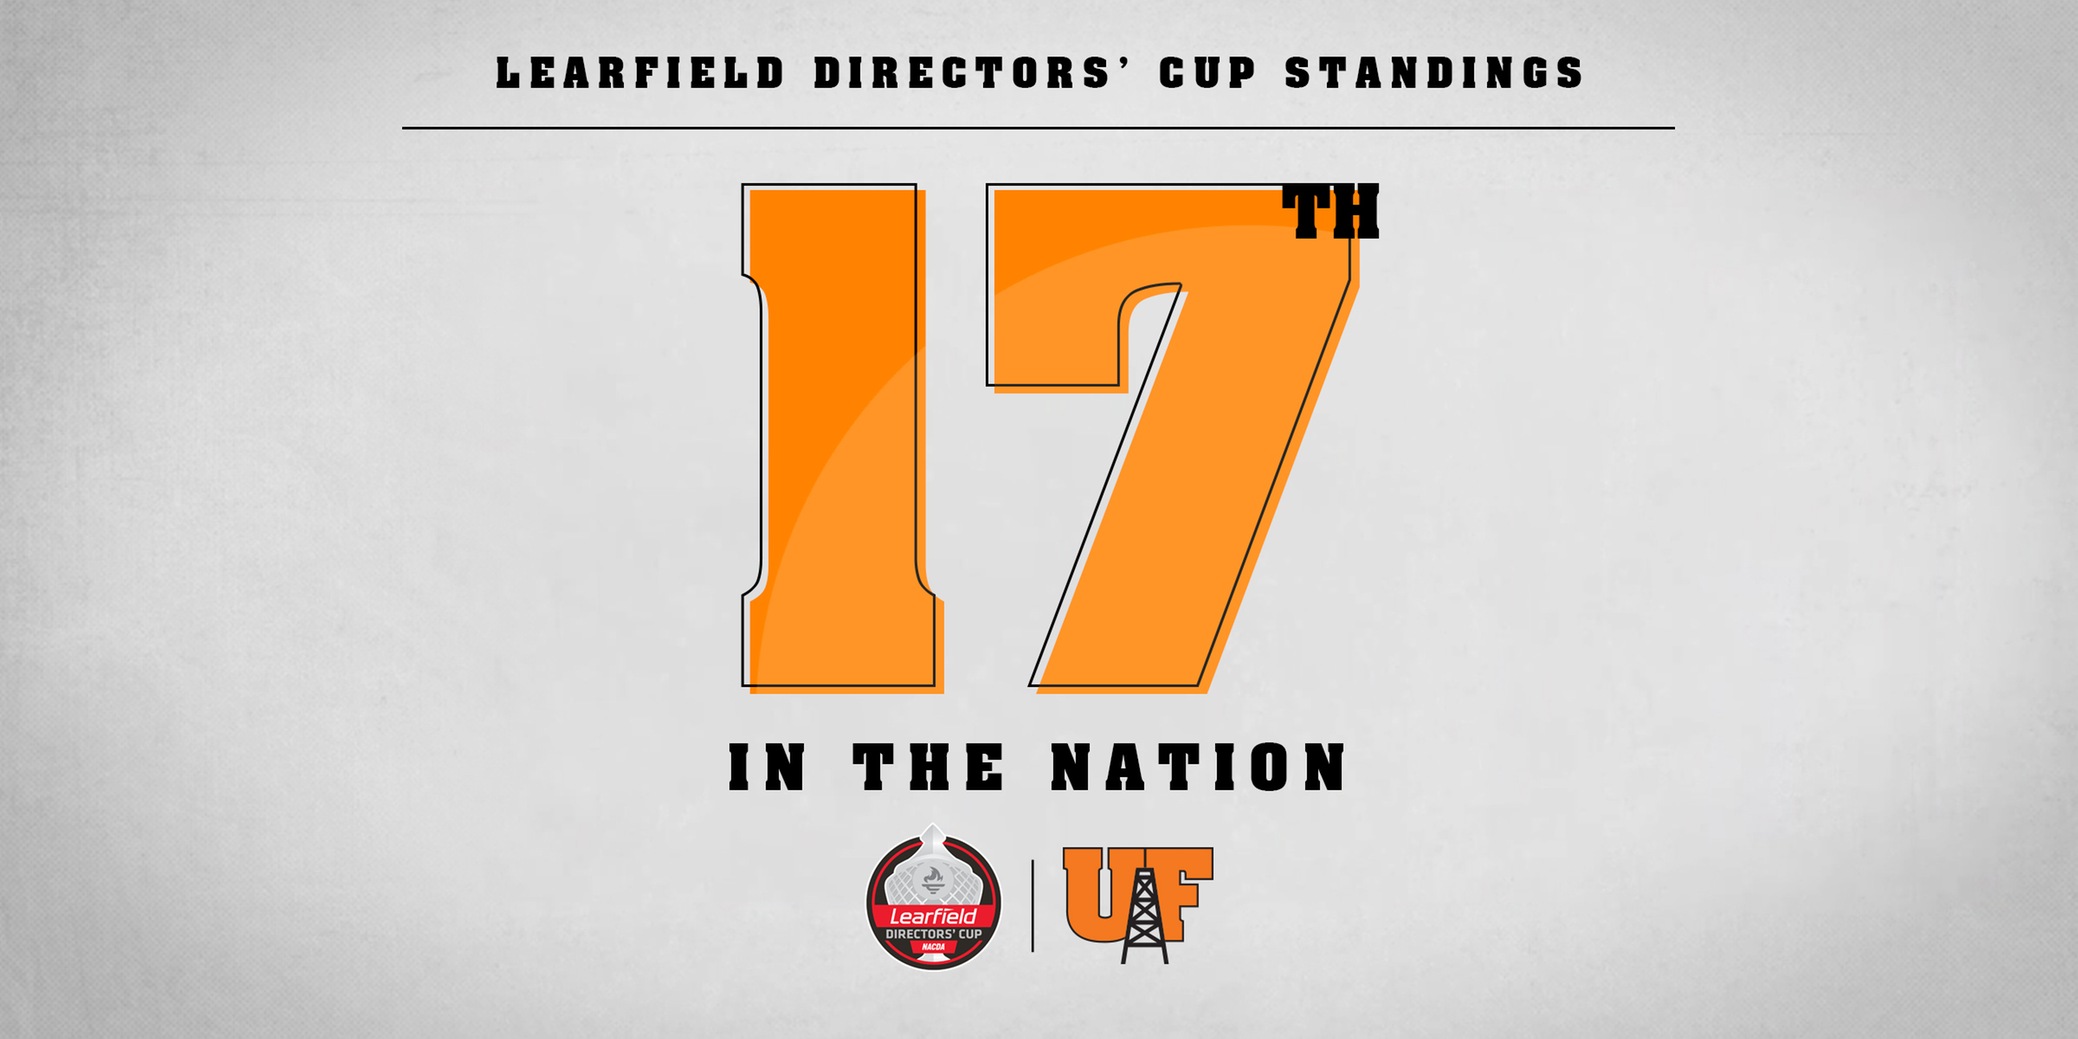 Findlay Finishes 17th in Learfield Standings | Ties Highest Finish Ever